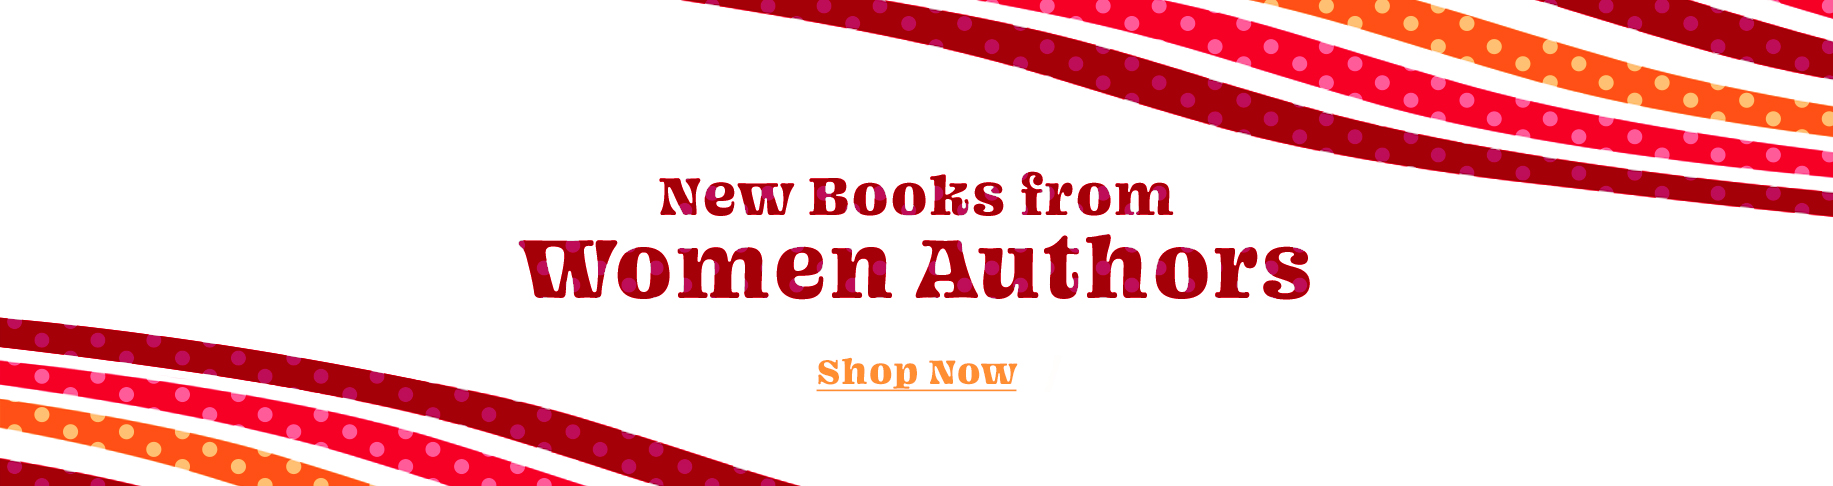 New Books from Women Authors - Shop Now